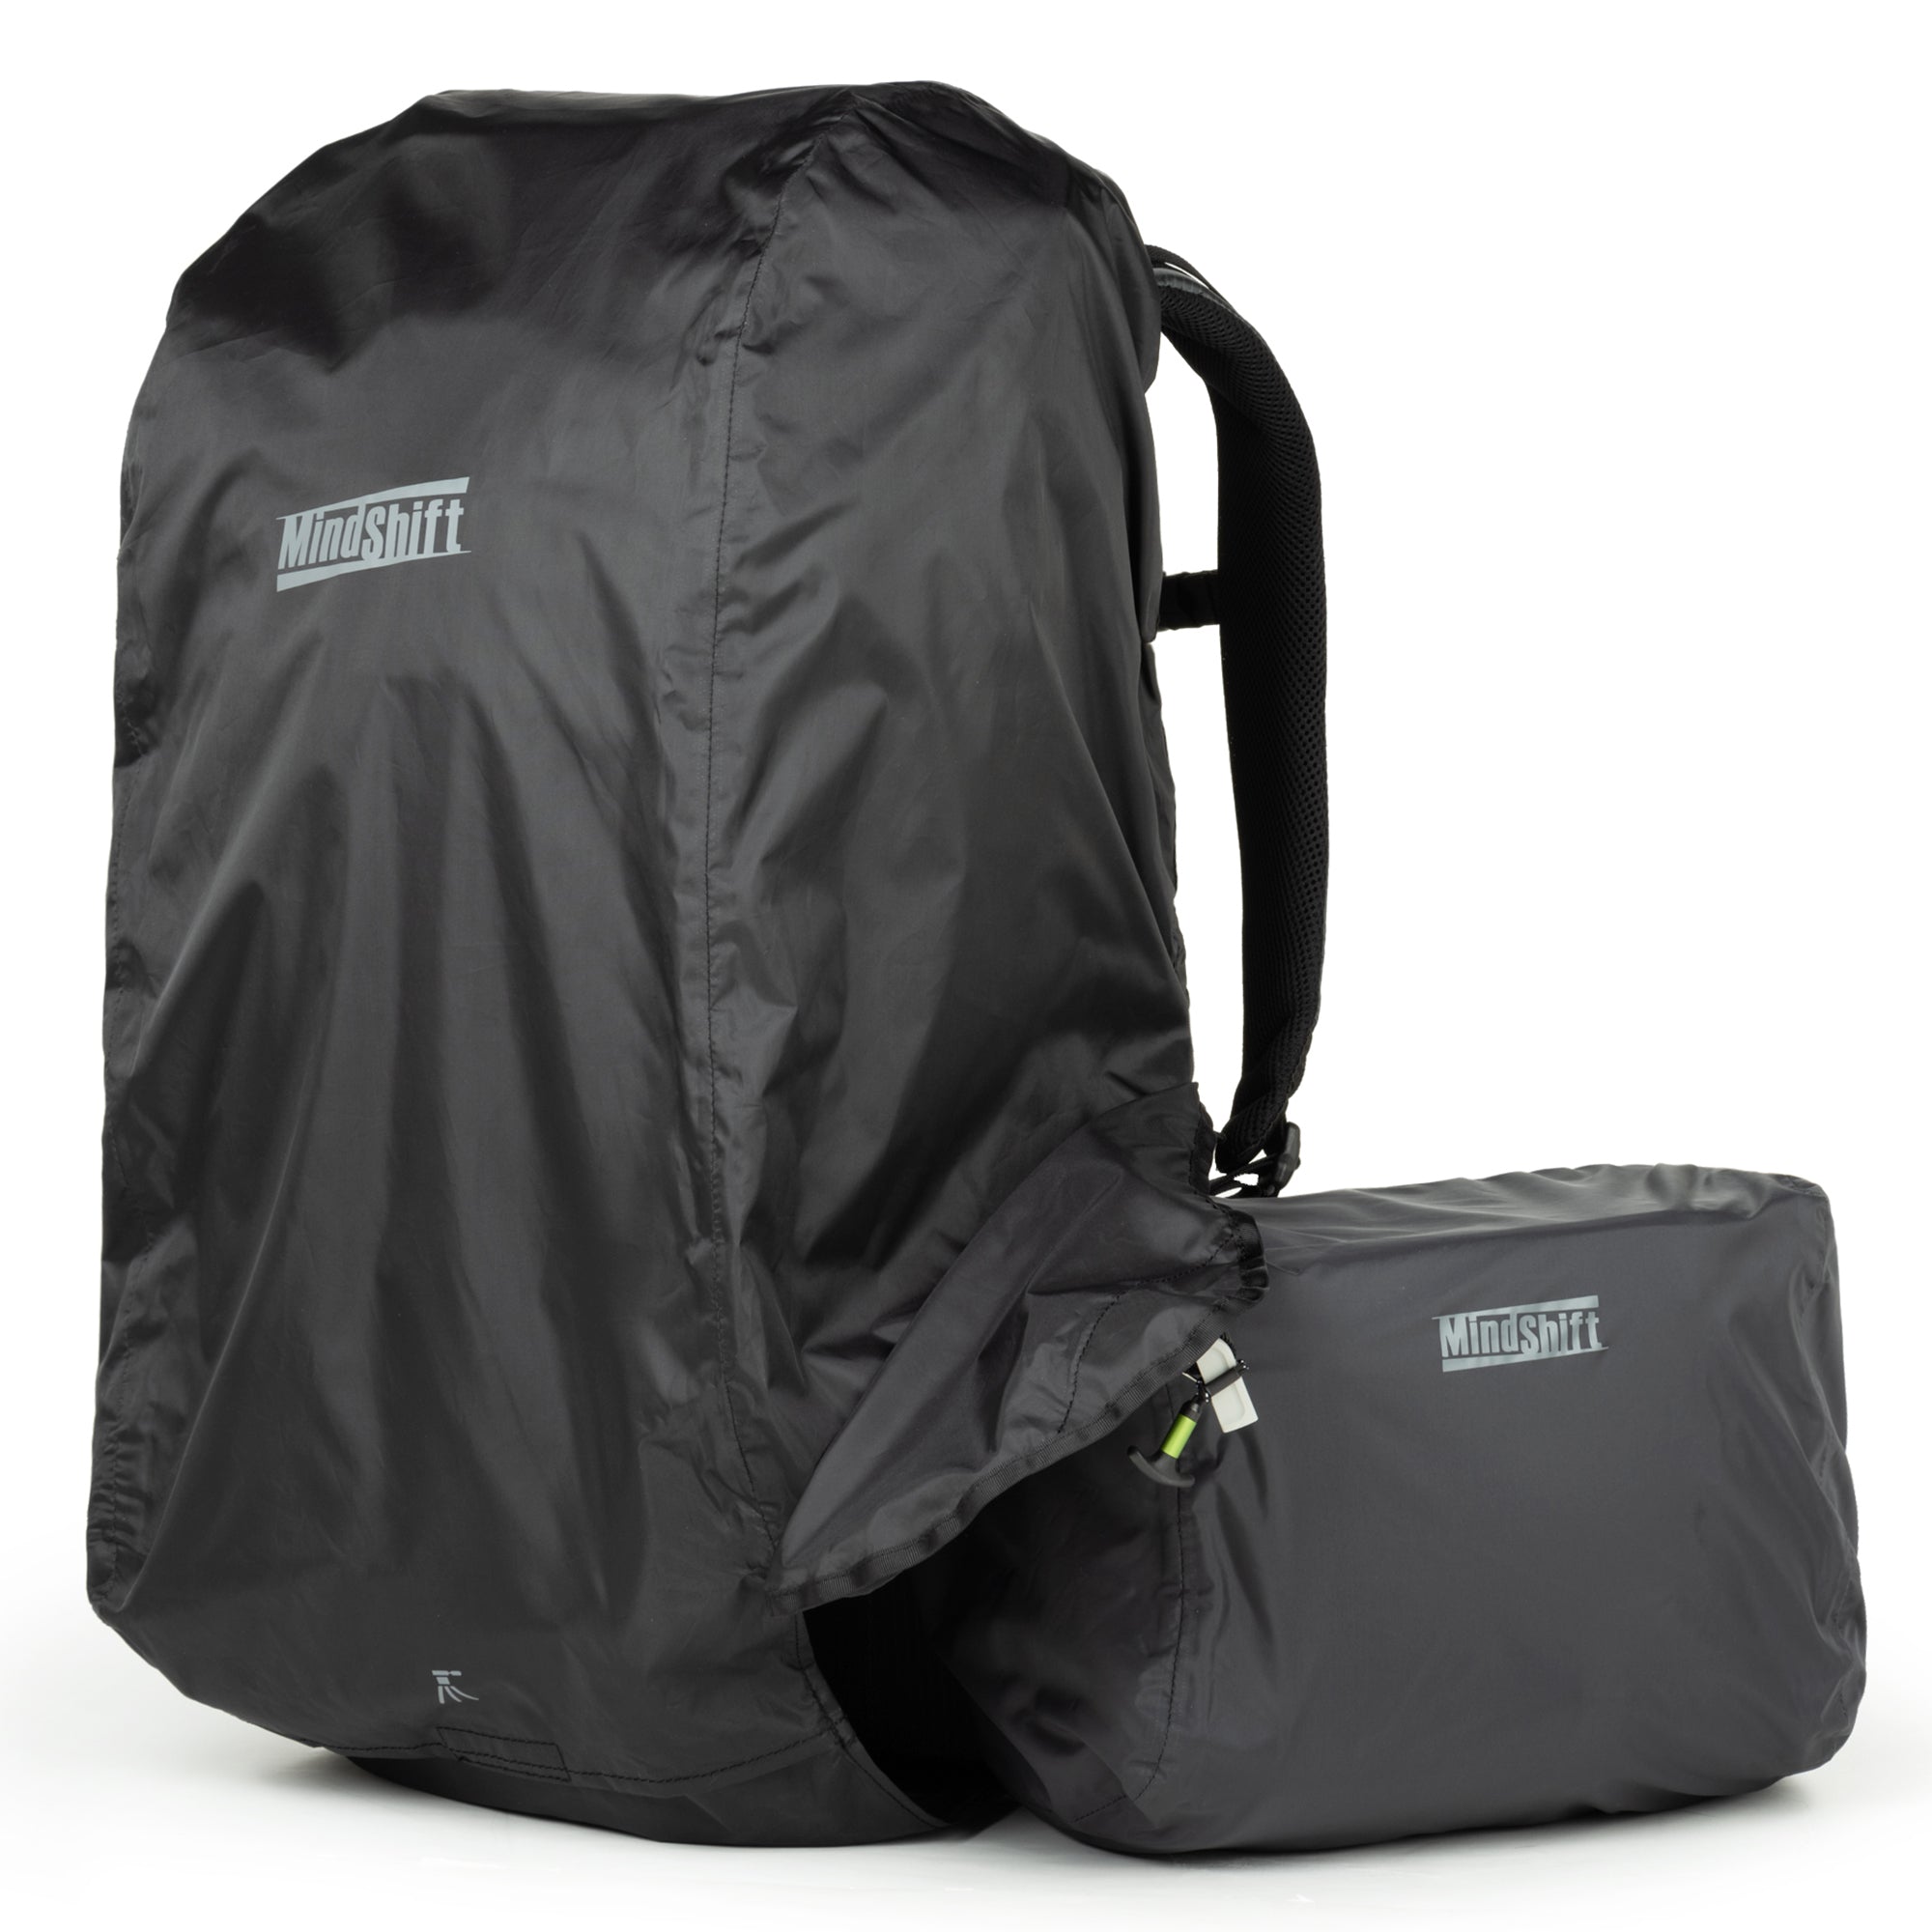 Rain covers for both backpack and belt pack (sold separately)